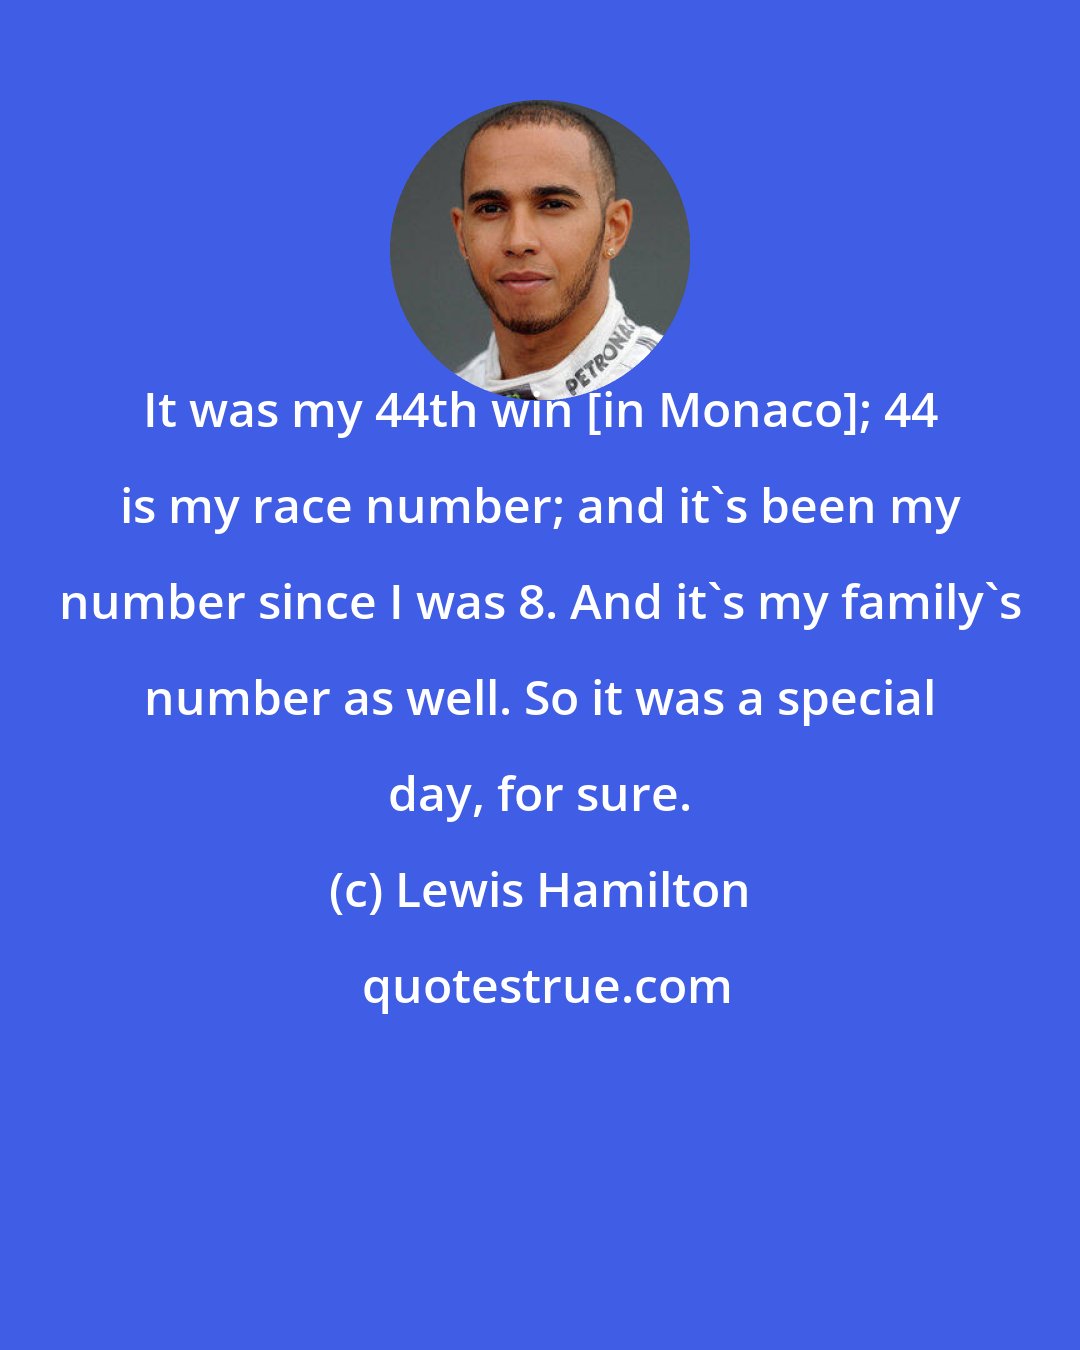 Lewis Hamilton: It was my 44th win [in Monaco]; 44 is my race number; and it's been my number since I was 8. And it's my family's number as well. So it was a special day, for sure.